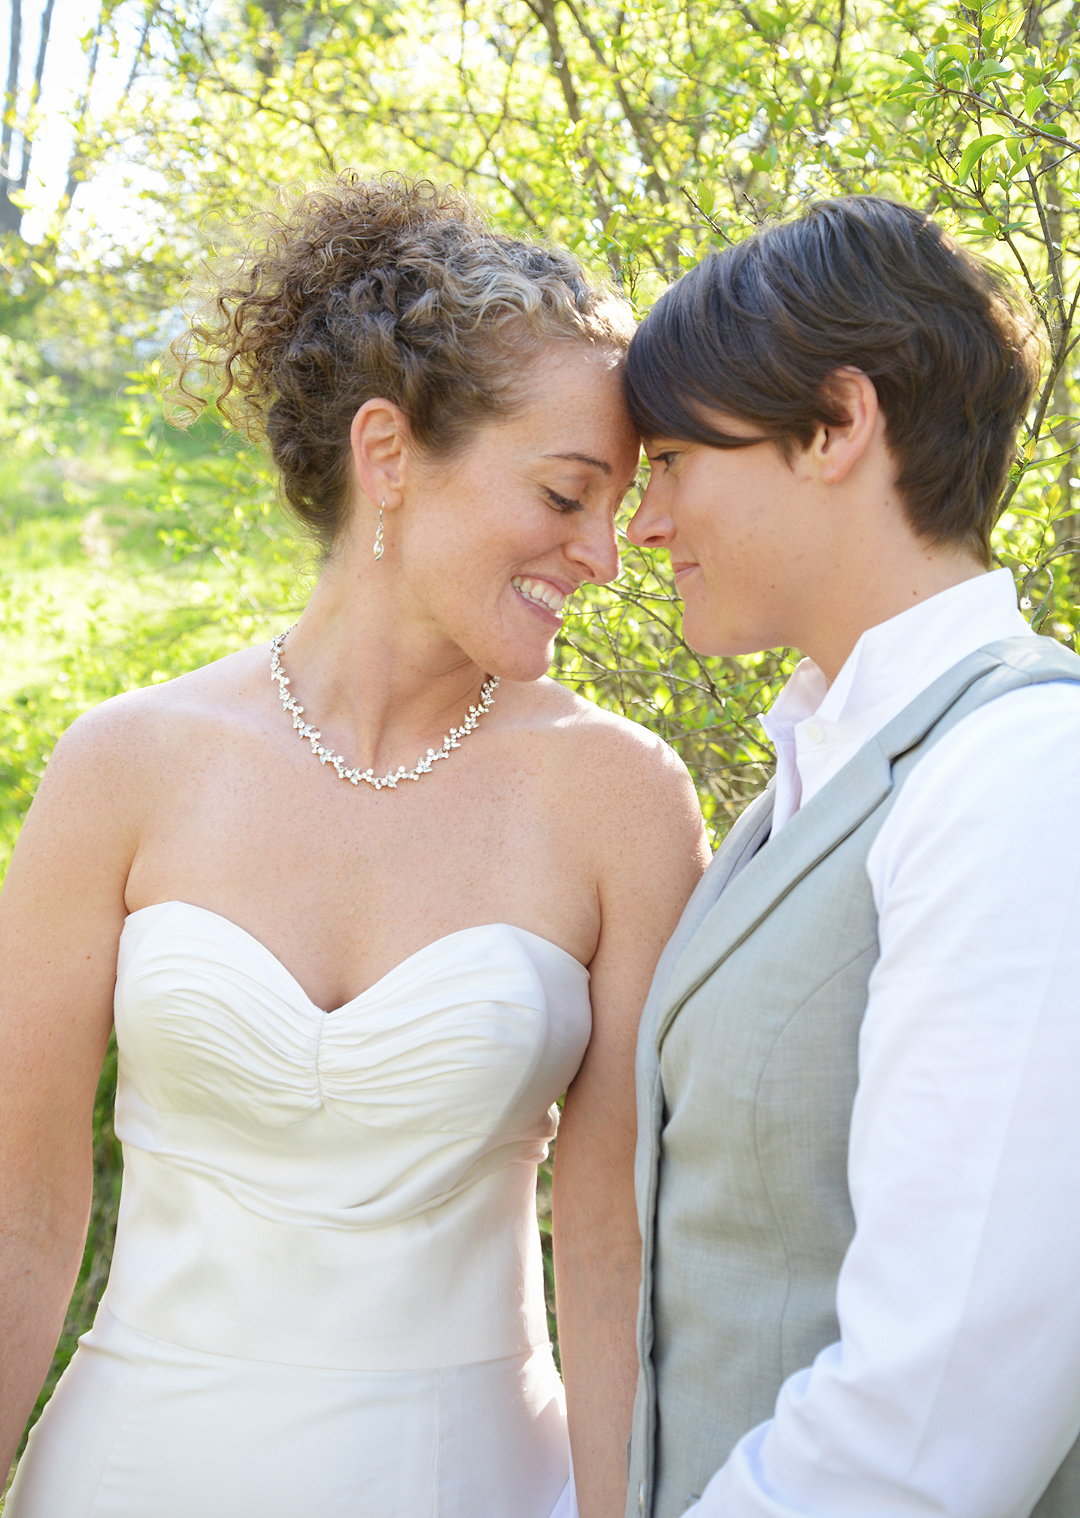 Megan and Hillary Marry at Audrey's B&B in the Hudson Valley